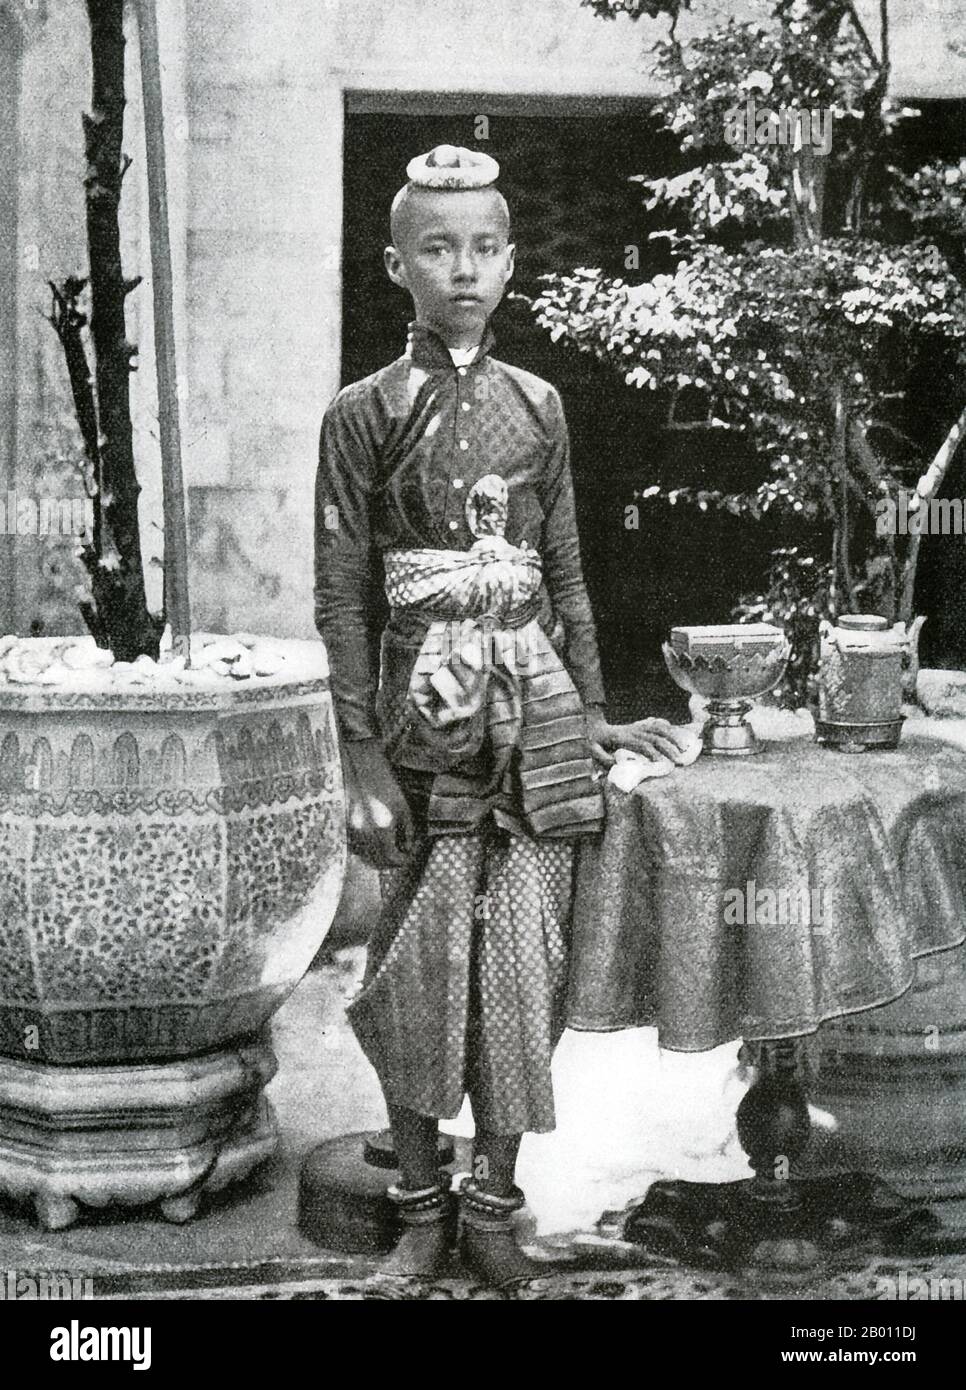 Thailand: King Chulalongkorn as a young prince, Siam. Photo by John Thomson (1837-1921), c. 1865.  King Chulalongkorn, Rama V (1853–1910) was the fifth monarch of Siam under the House of Chakri. He acceded to the throne at the age of 15 after the death of his father, King Mongkut, Rama IV. King Chulalongkorn is considered one of the greatest kings of Siam. His reign was characterized by the modernization of the country, including major governmental and social reforms. He is also credited with saving Siam from being colonized. Stock Photo